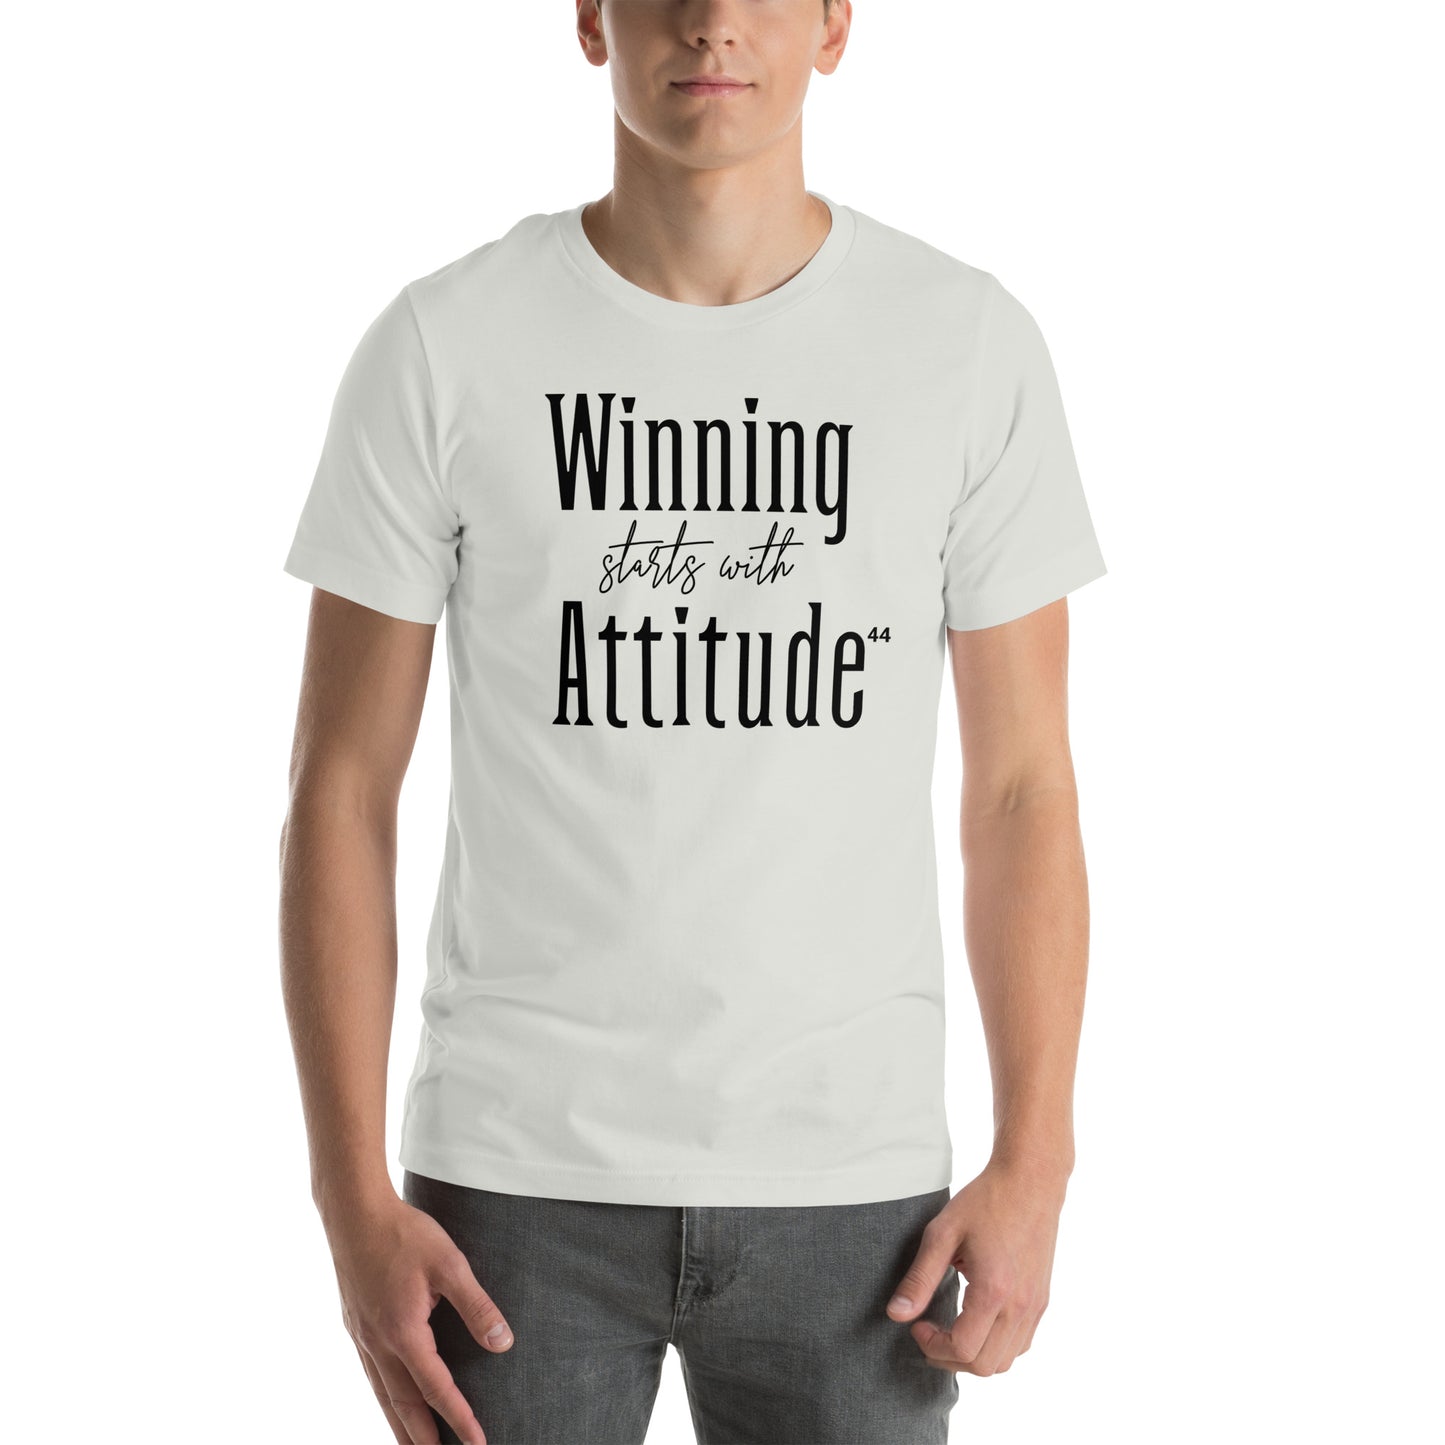 WINNING STARTS WITH YOUR ATTITUDE.